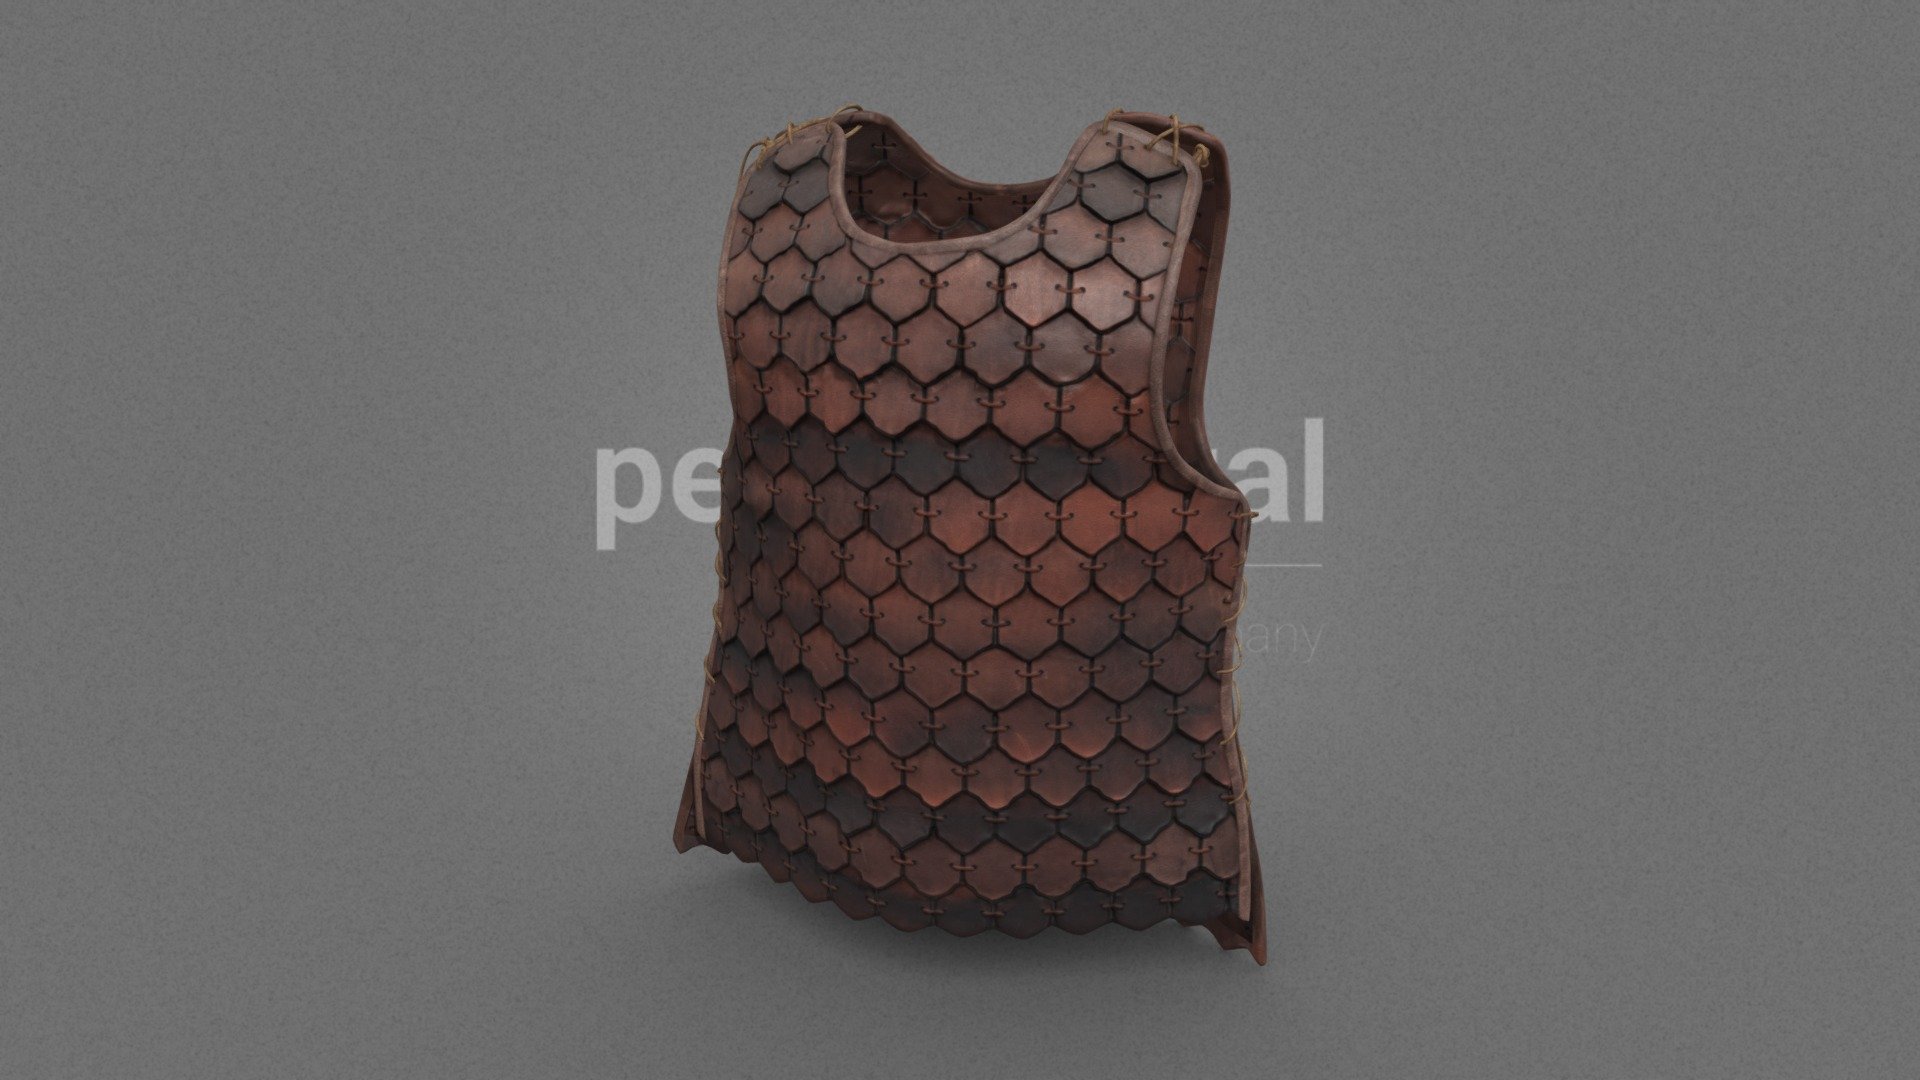 Leather cuirass armor

They are optimized for use in medium/high poly 3D scenes and optimized for rendering, positioned for you to include and adjust your own character.
We have included in Additional Files, the texture maps in high resolution, and the Blender file to edit any aspect of the set.
Enjoy it!

Don’t find what you need? Look to our immense stock of real costumes: periscostumes.com/en/our-stock/. 
Make your selection, send it to us, and we will scan it for you. Contact us and ask for a demo at info@peris.digital

Web: https://peris.digital/ - Leather Cuirass 05 - Buy Royalty Free 3D model by Peris Digital (@perisdigital) 3d model